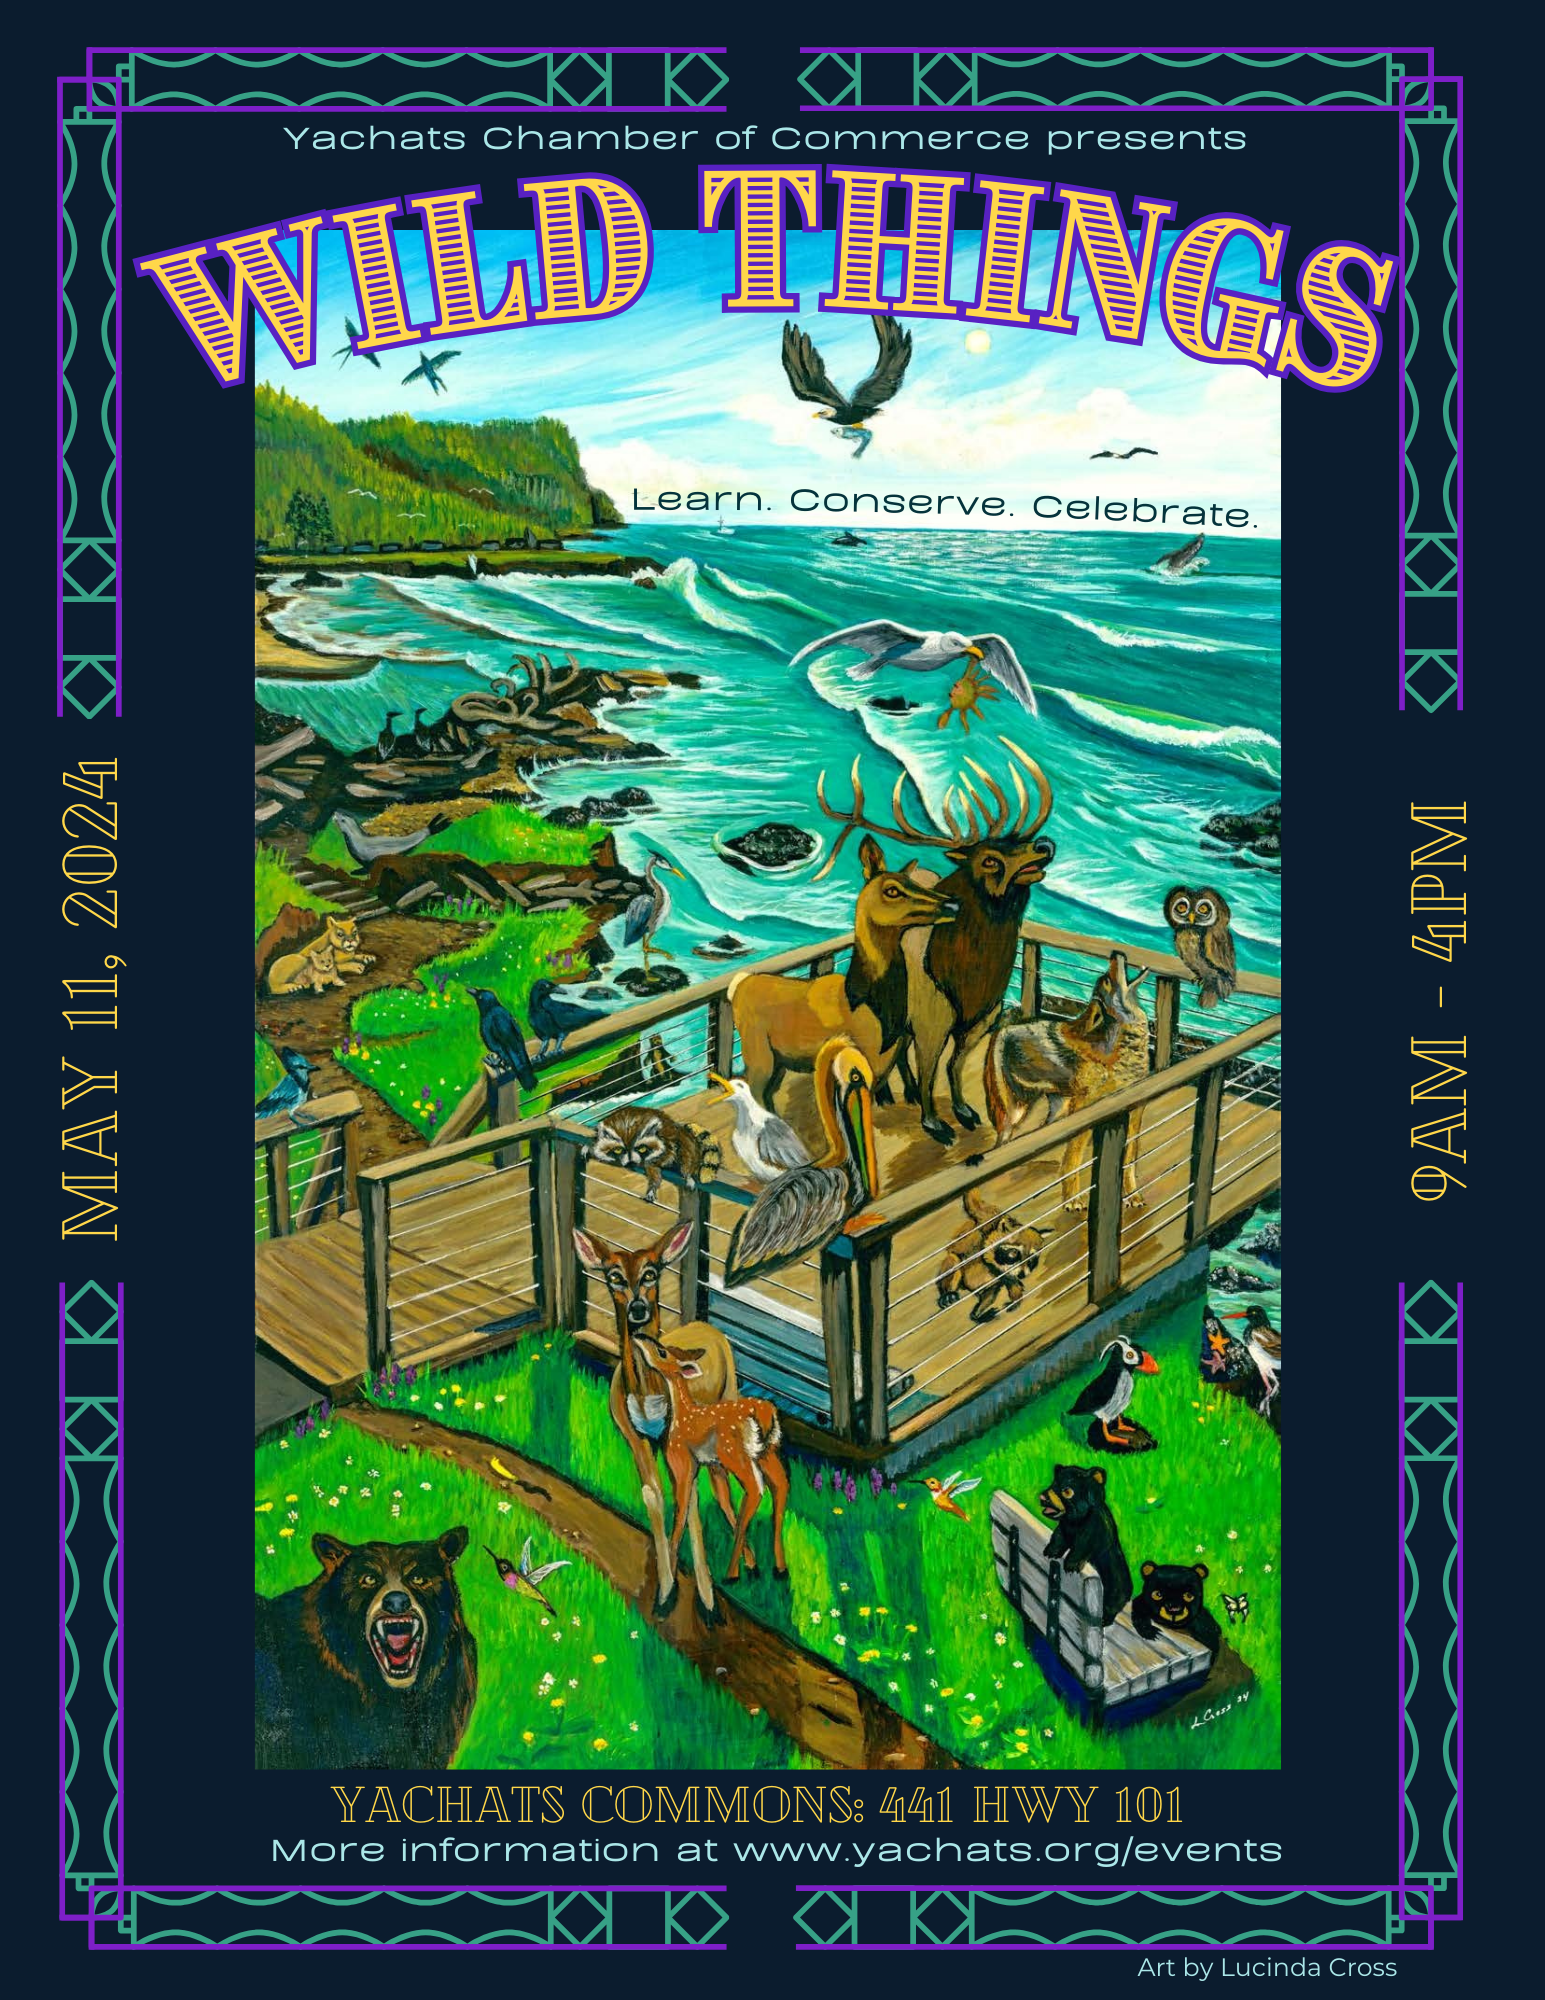 Wild Things Poster